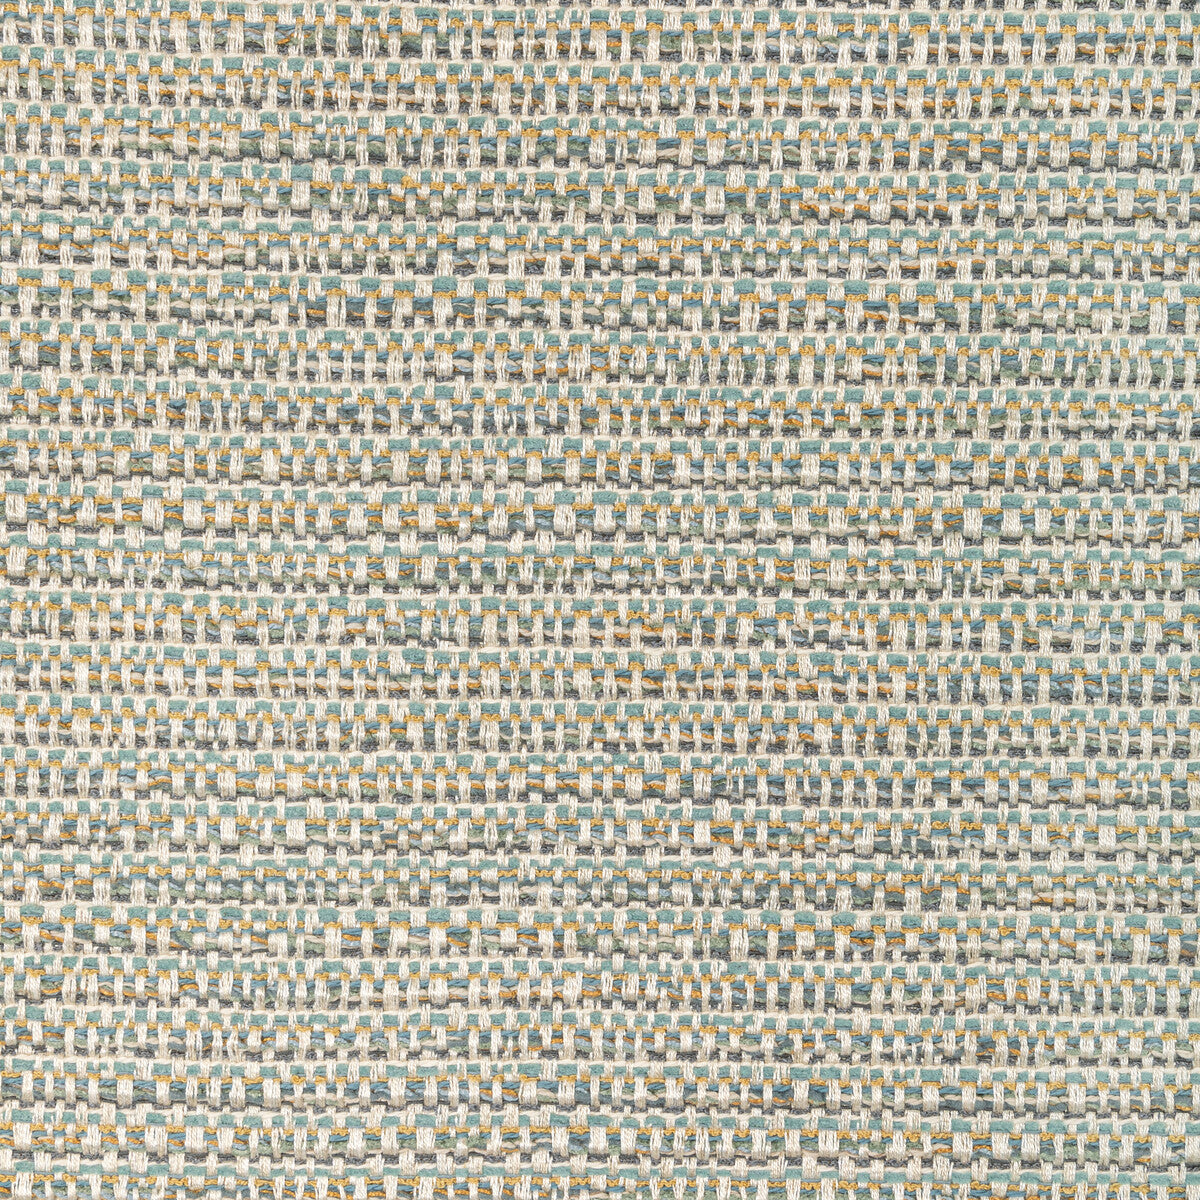 Kravet Design fabric in 36417-413 color - pattern 36417.413.0 - by Kravet Design in the Performance Crypton Home collection